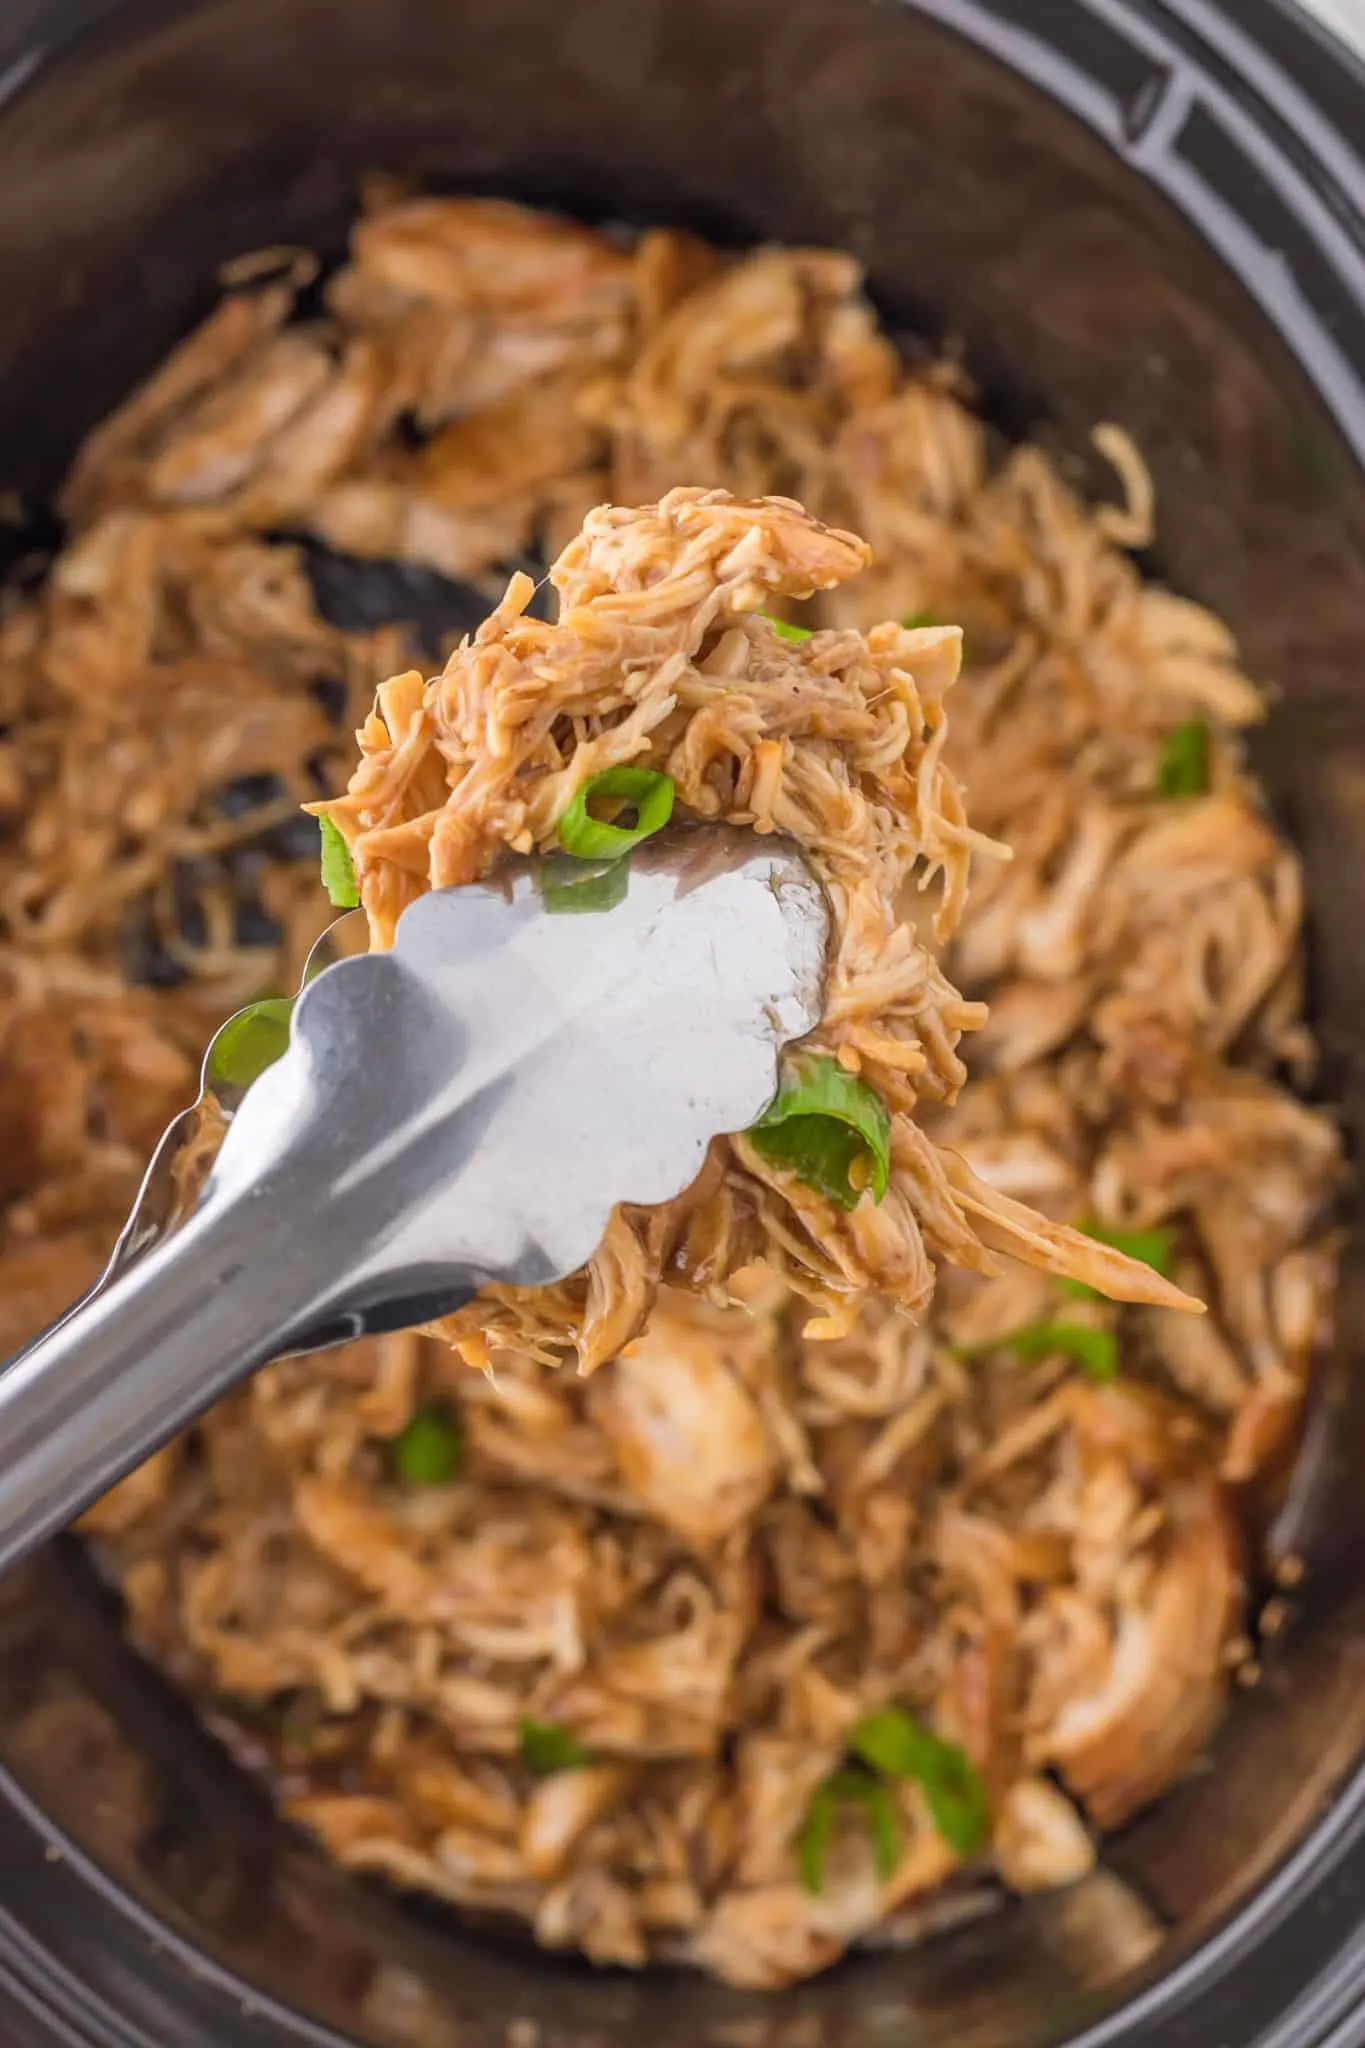 Crock Pot Teriyaki Chicken is a delicious slow cooker chicken recipe using boneless skinless chicken breasts cooked in a homemade teriyaki sauce.